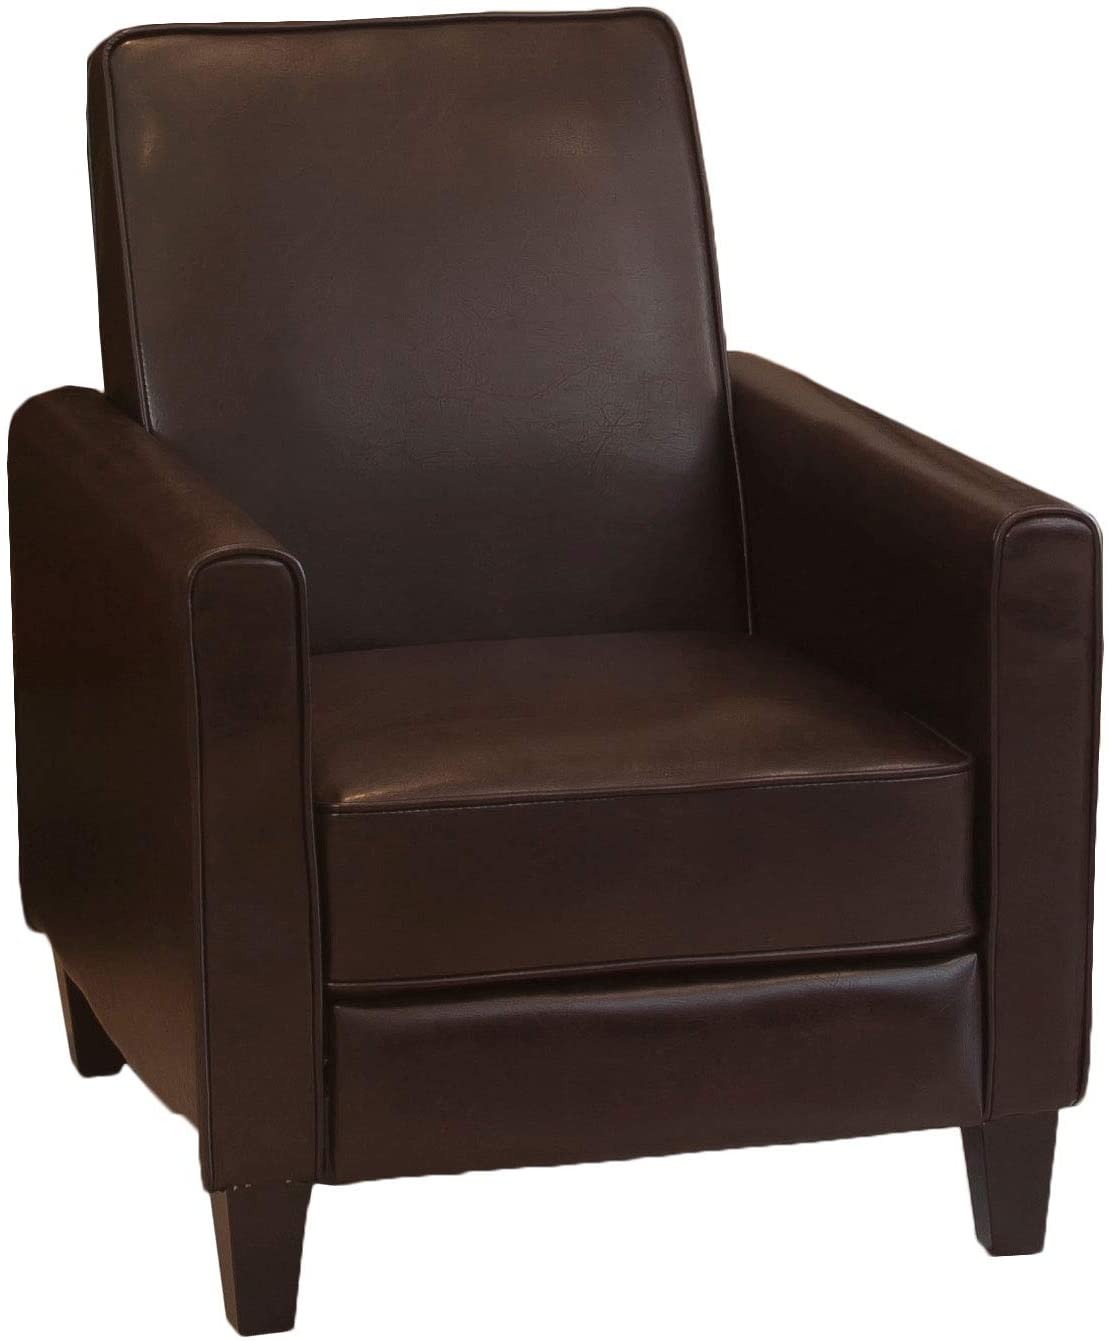 Christopher Knight Home Lucas Leather Recliner Club Chair